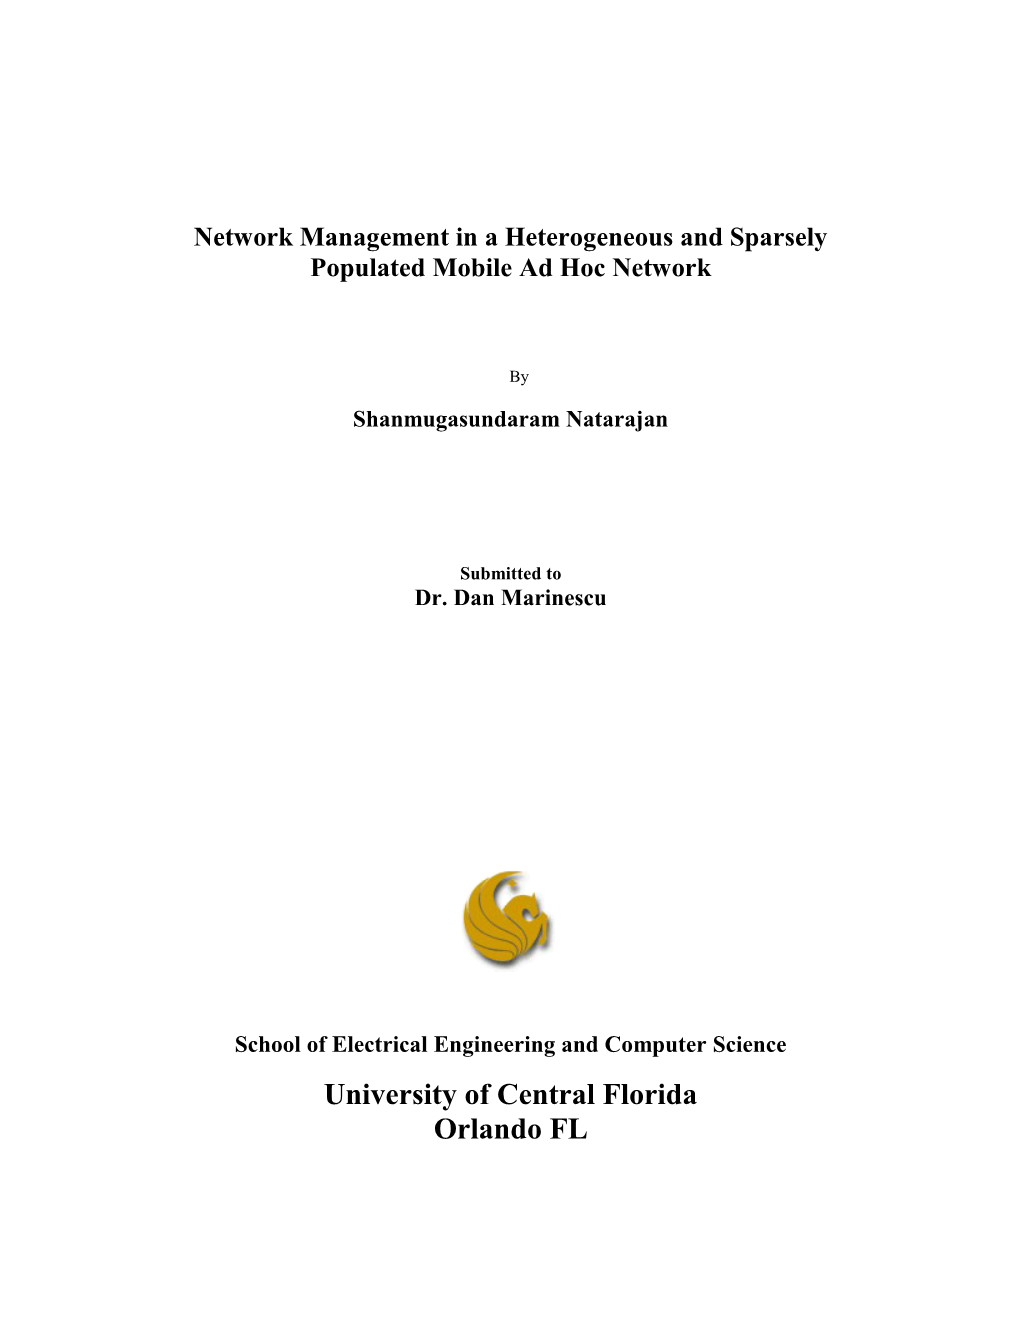 Network Management in a Heterogeneous and Sparsely Populated Mobile Ad Hoc Network